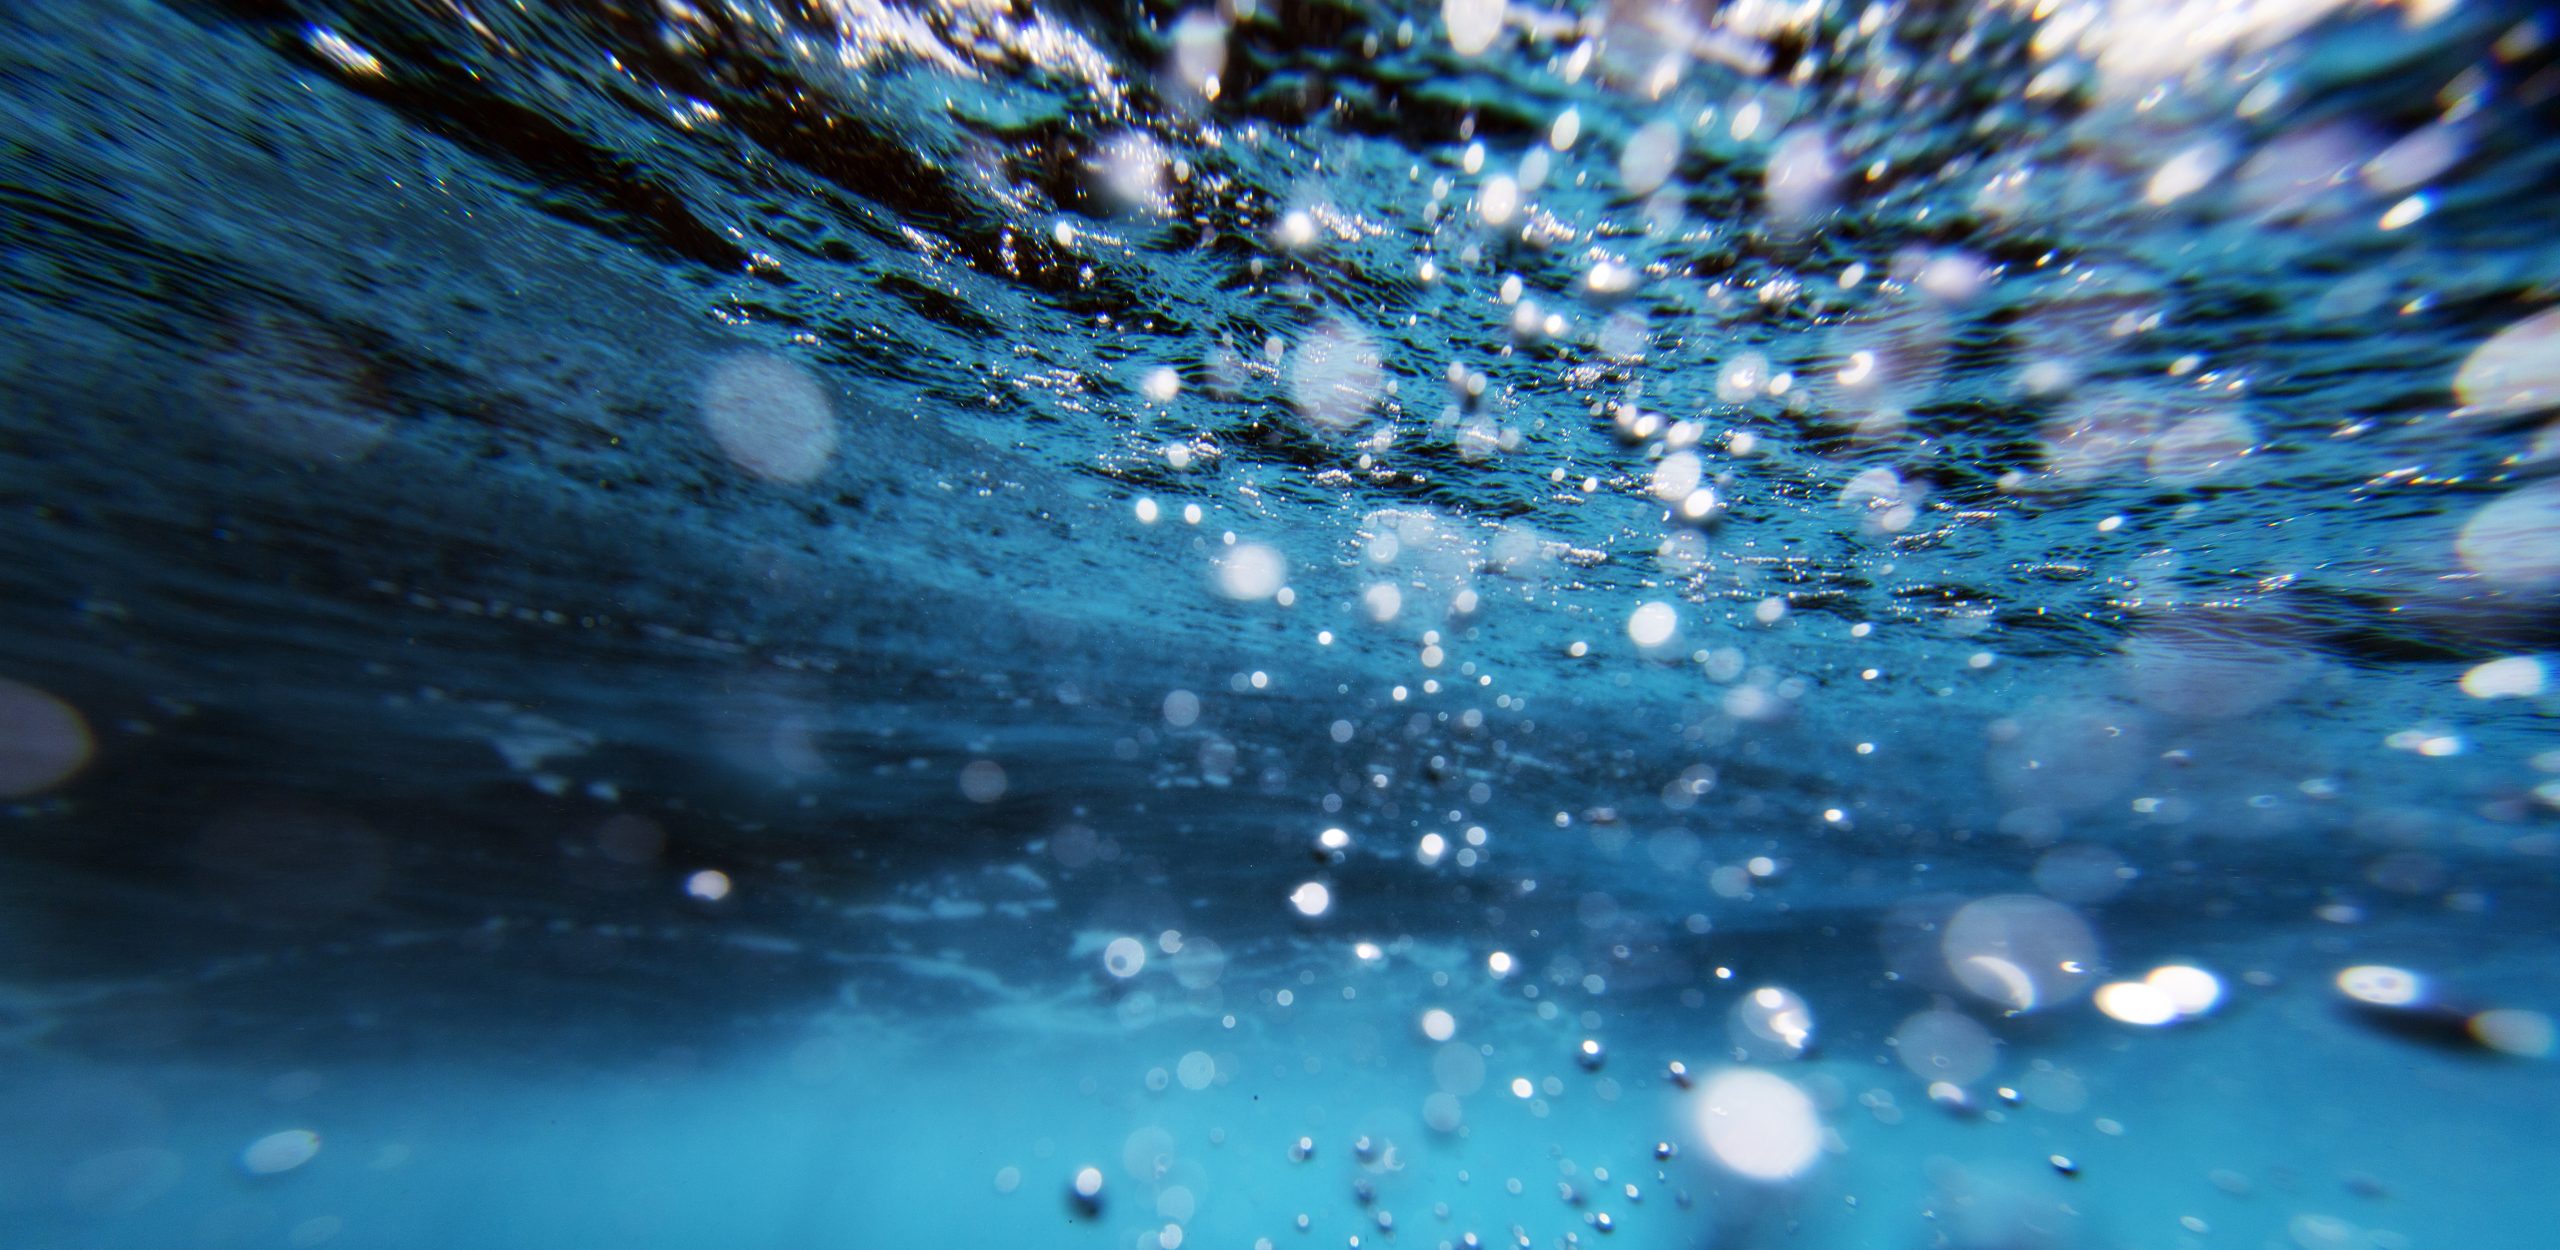 Underwater with bubbles floating to surface